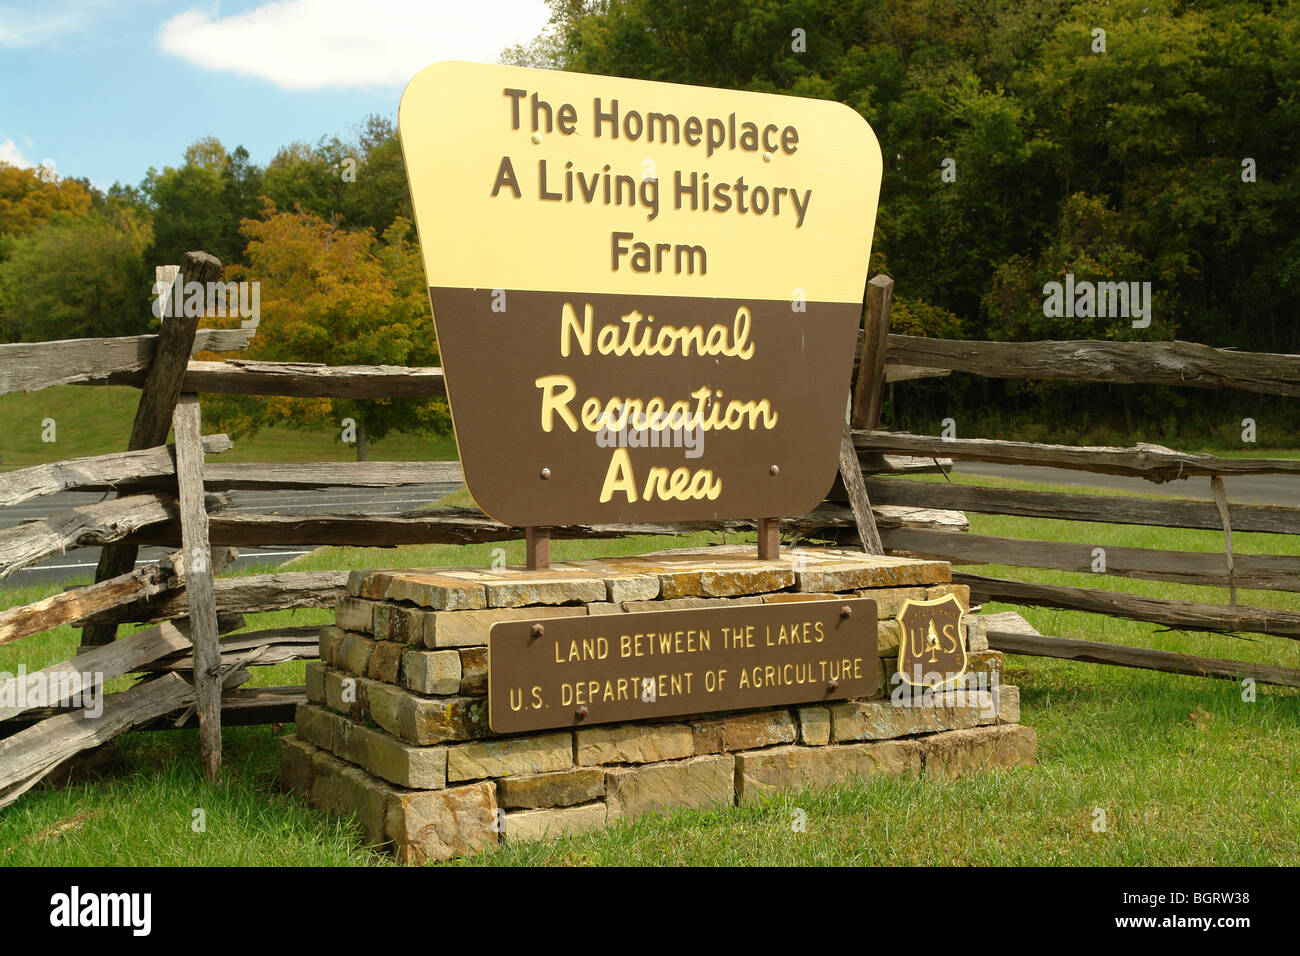 AJD62849, Land Between the Lakes, KY, Kentucky, NRA, The Homeplace A Living History Farm, entrance sign Stock Photo